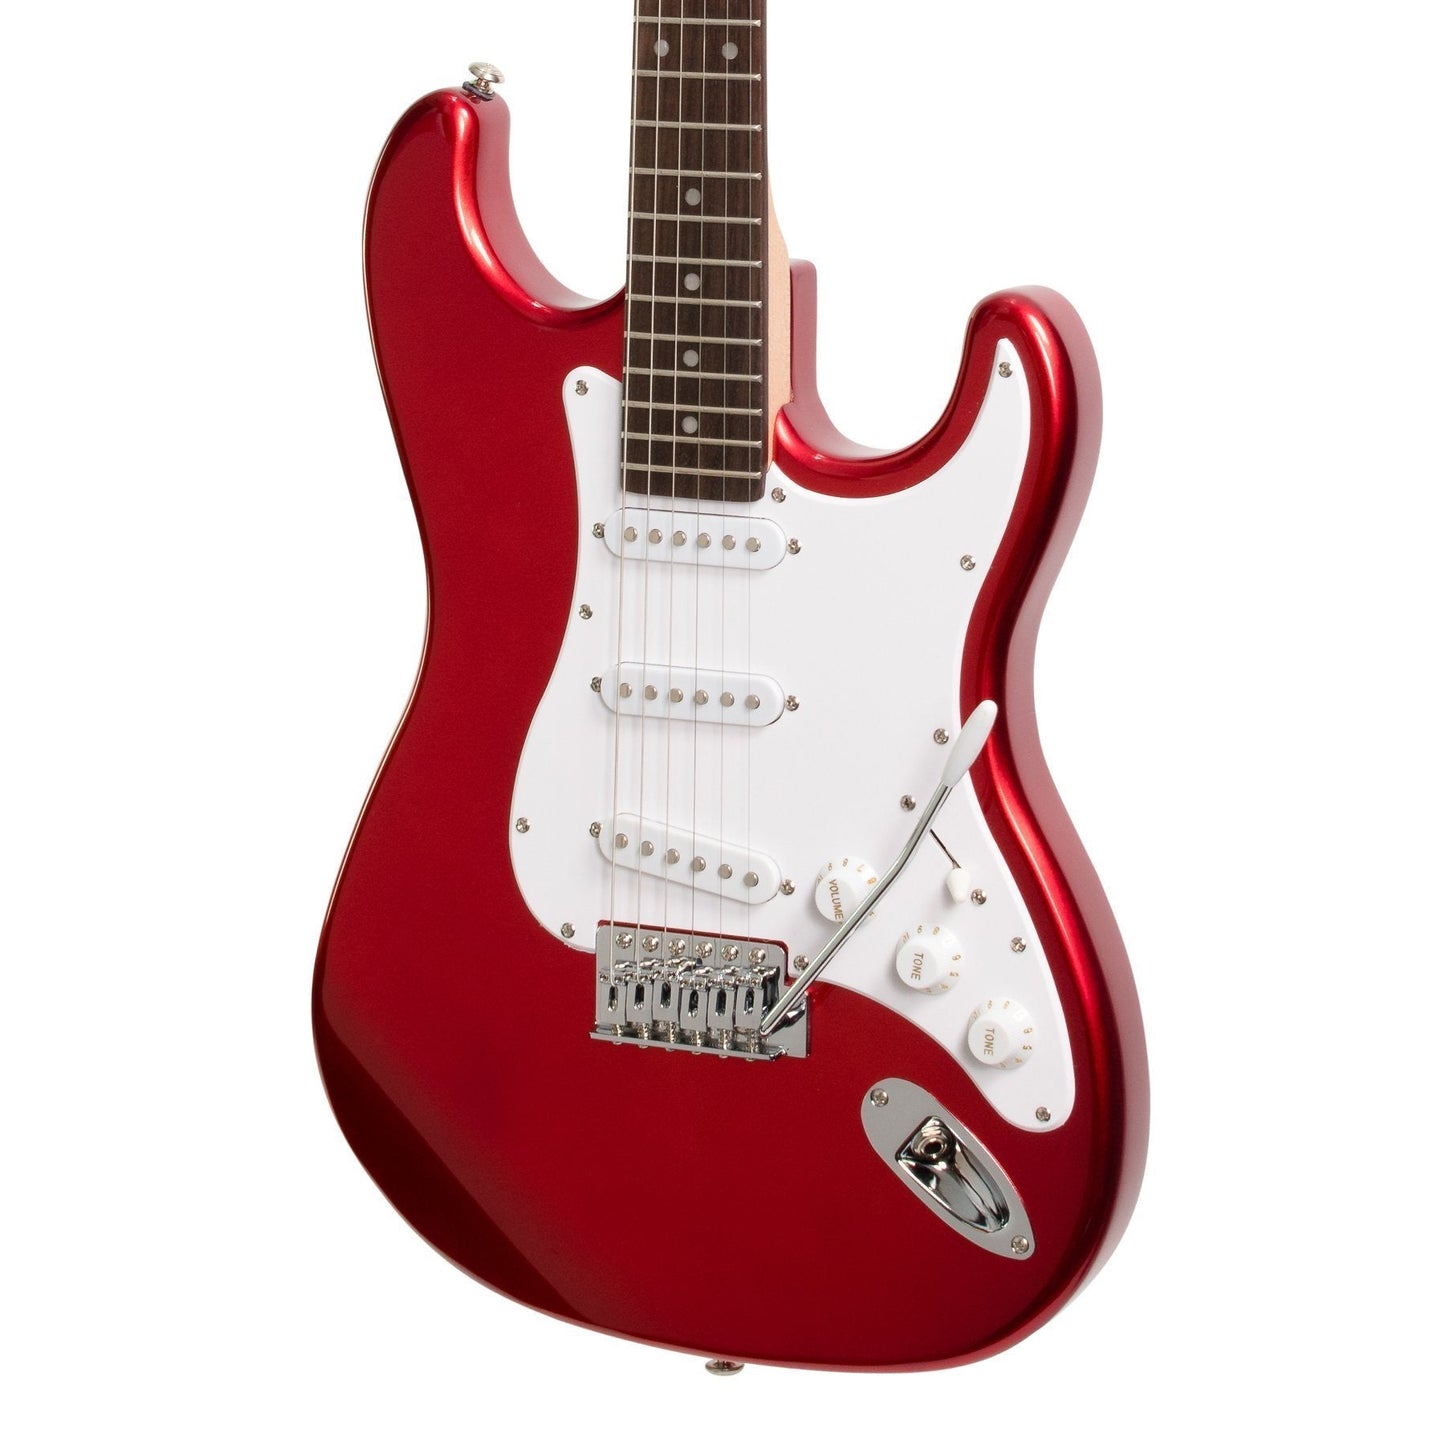 Casino ST-Style Electric Guitar and 15 Watt Amplifier Pack (Candy Apple Red)